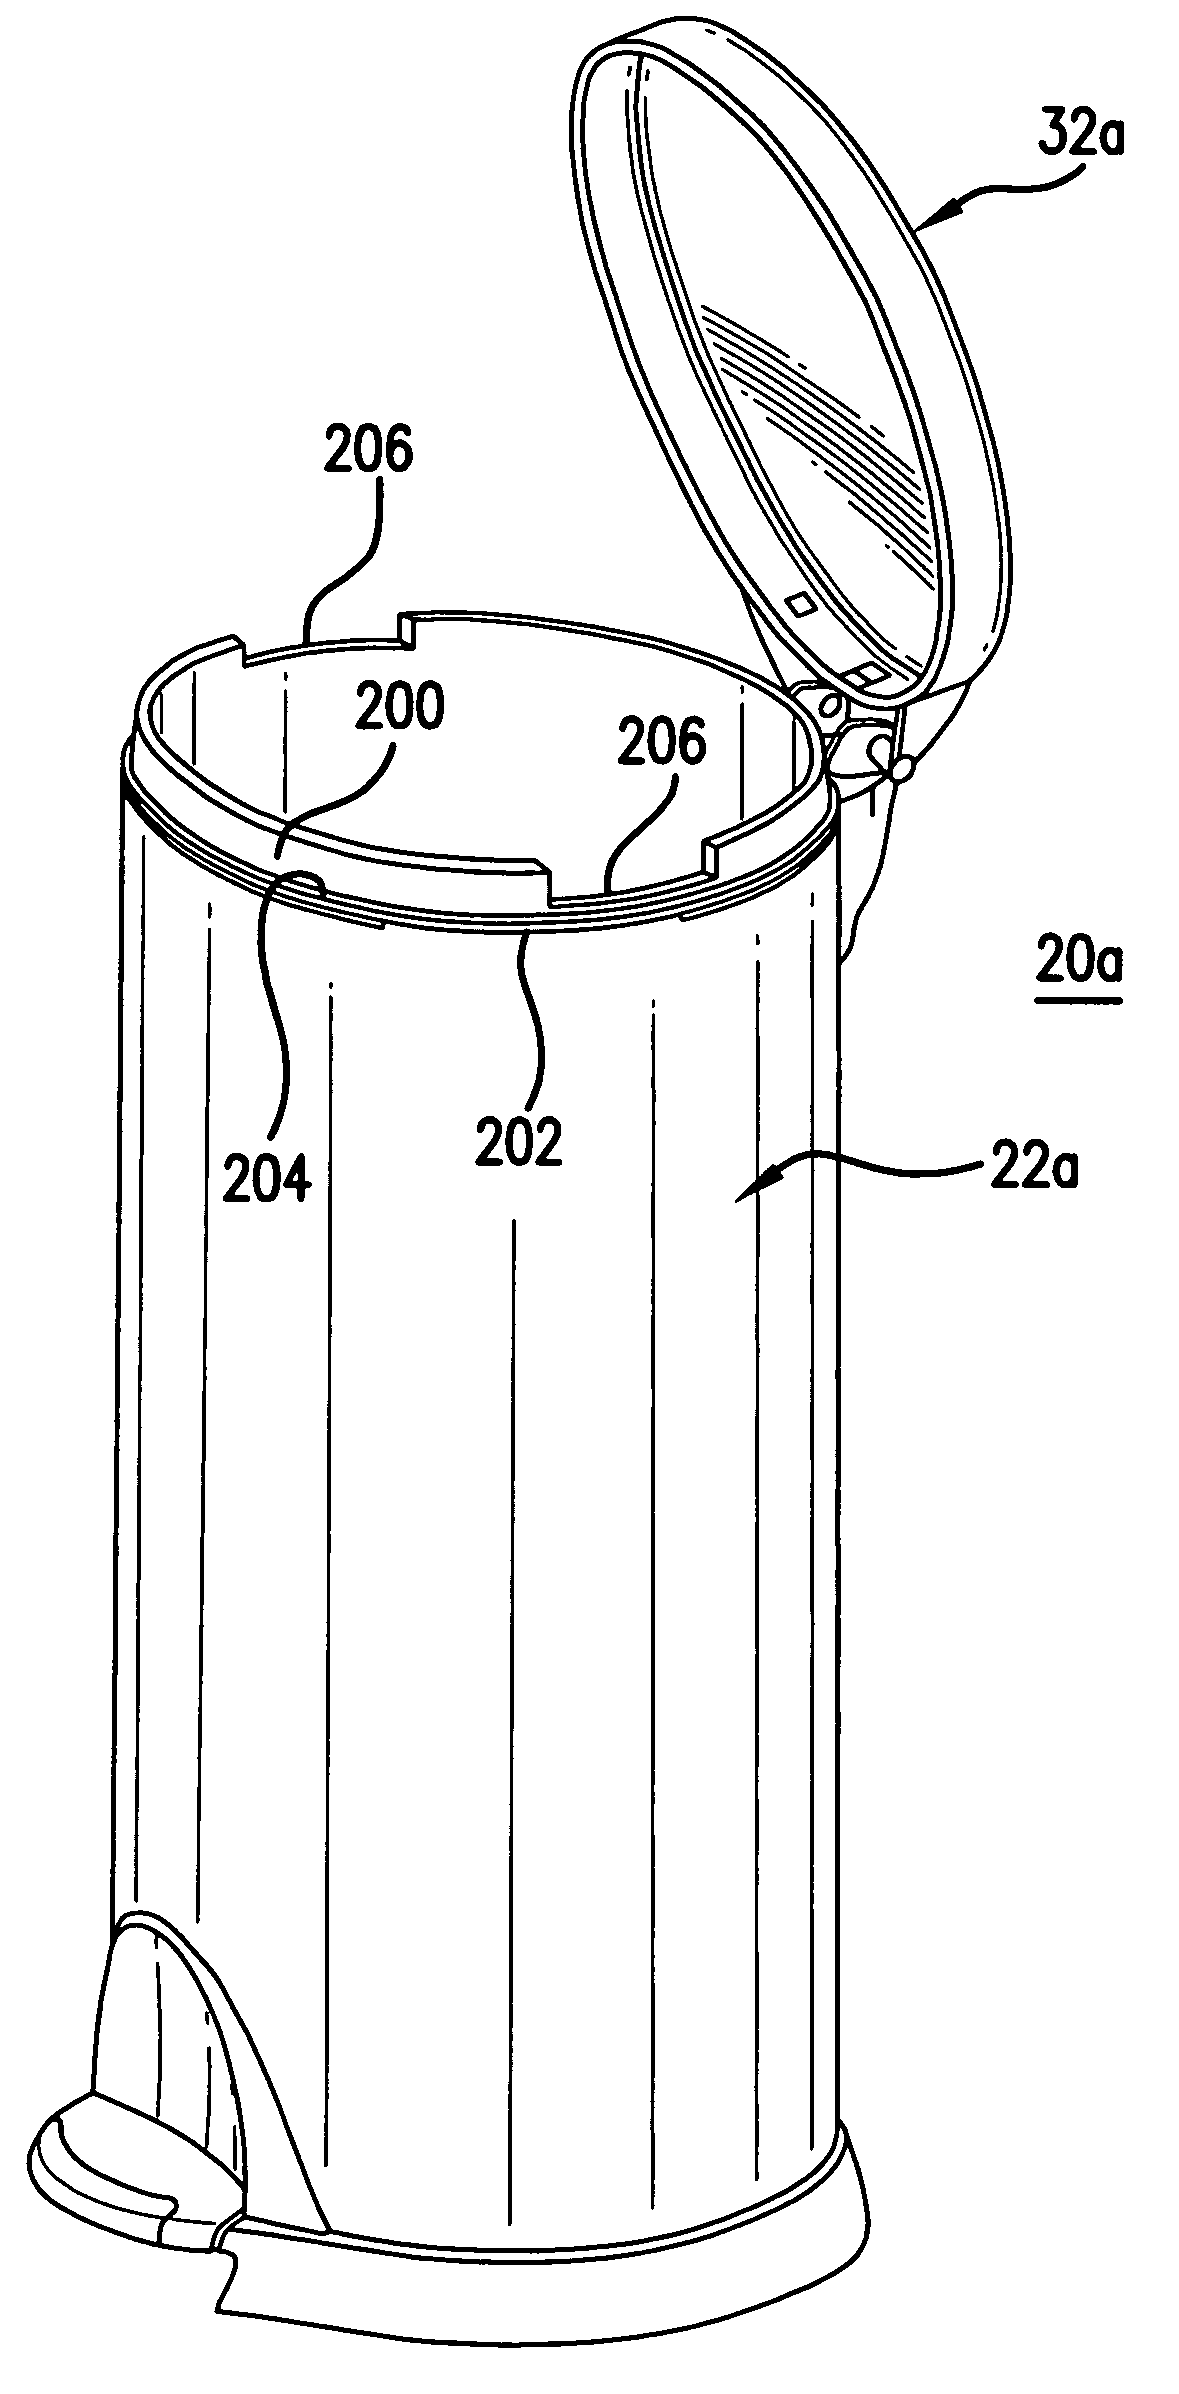 Trash can assembly and improvements thereto